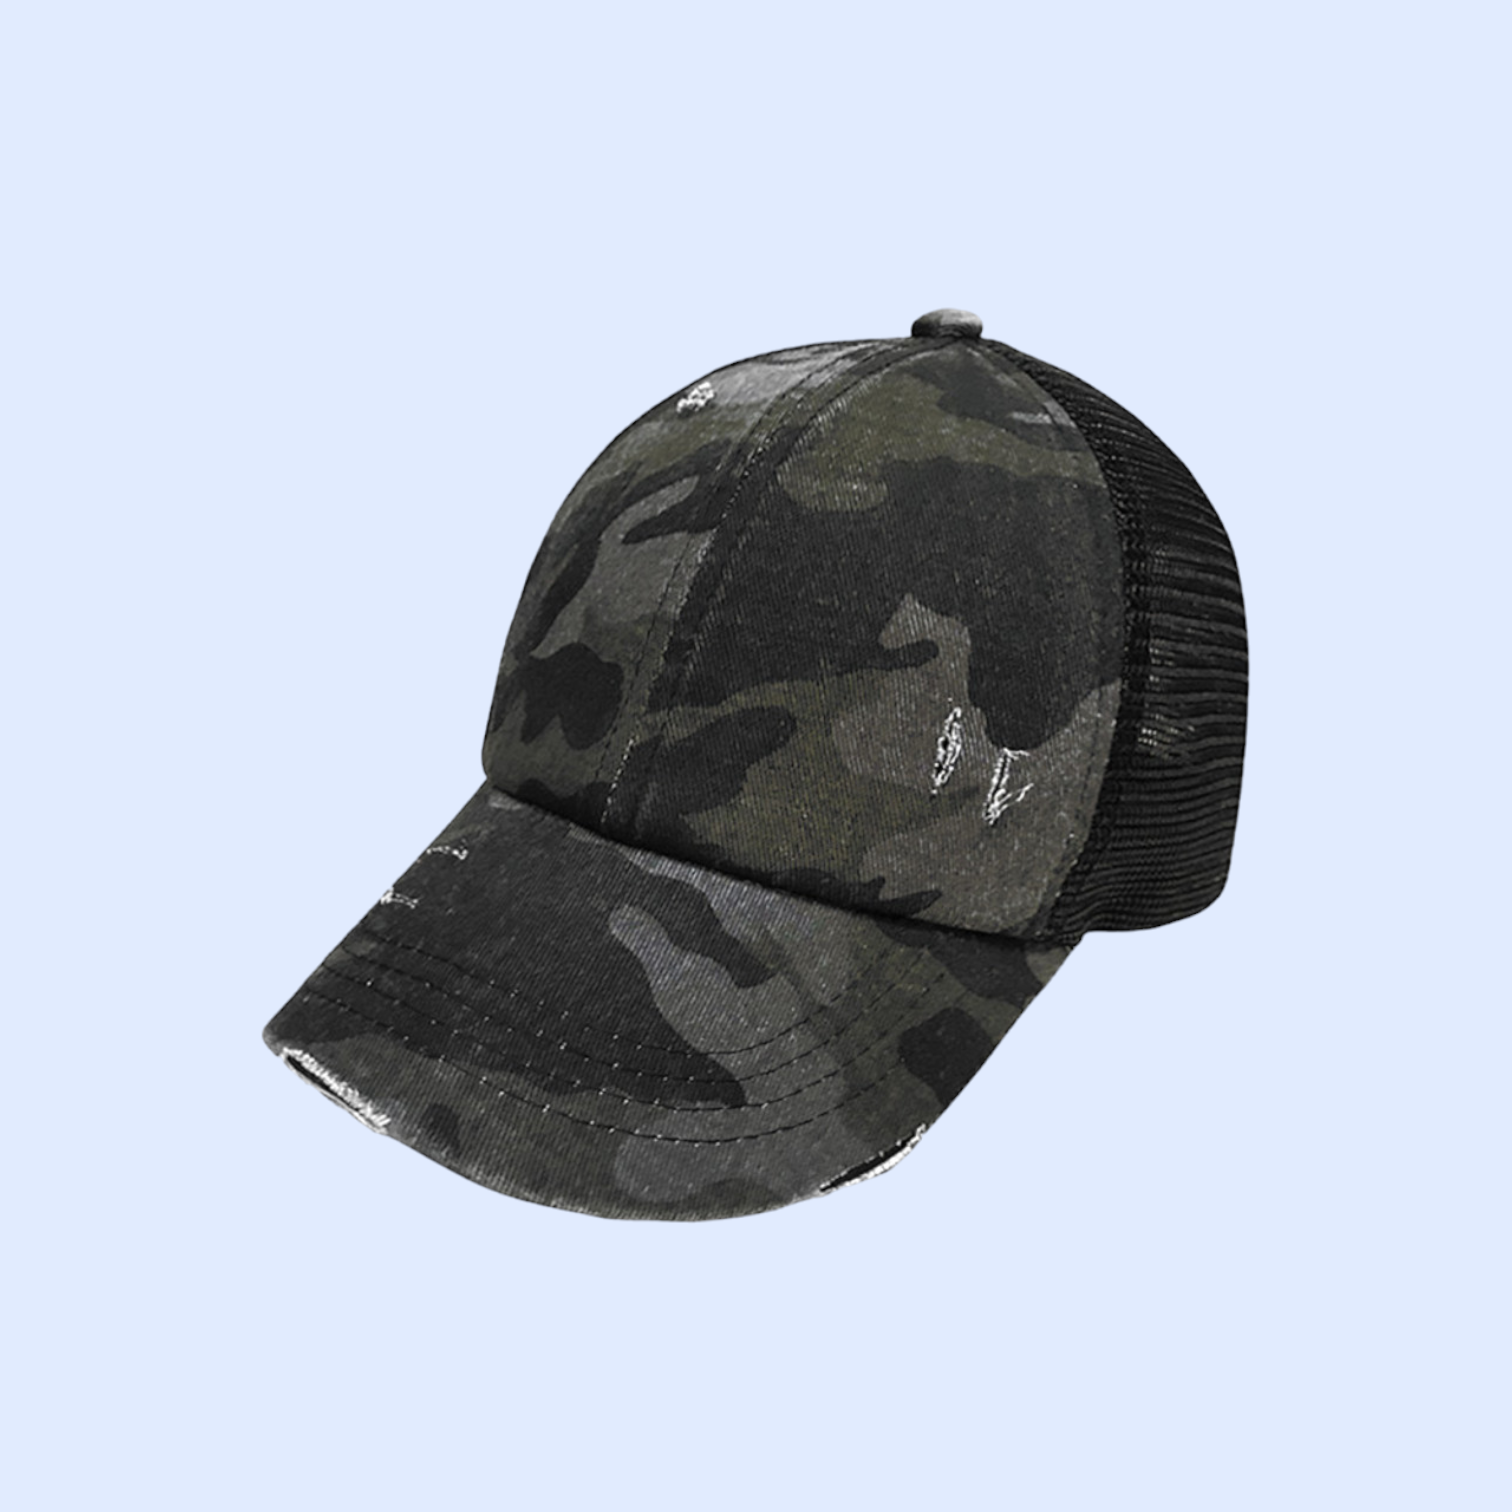 Distressed Camouflage Criss-CrossHigh Ponytail Ball Cap BT783